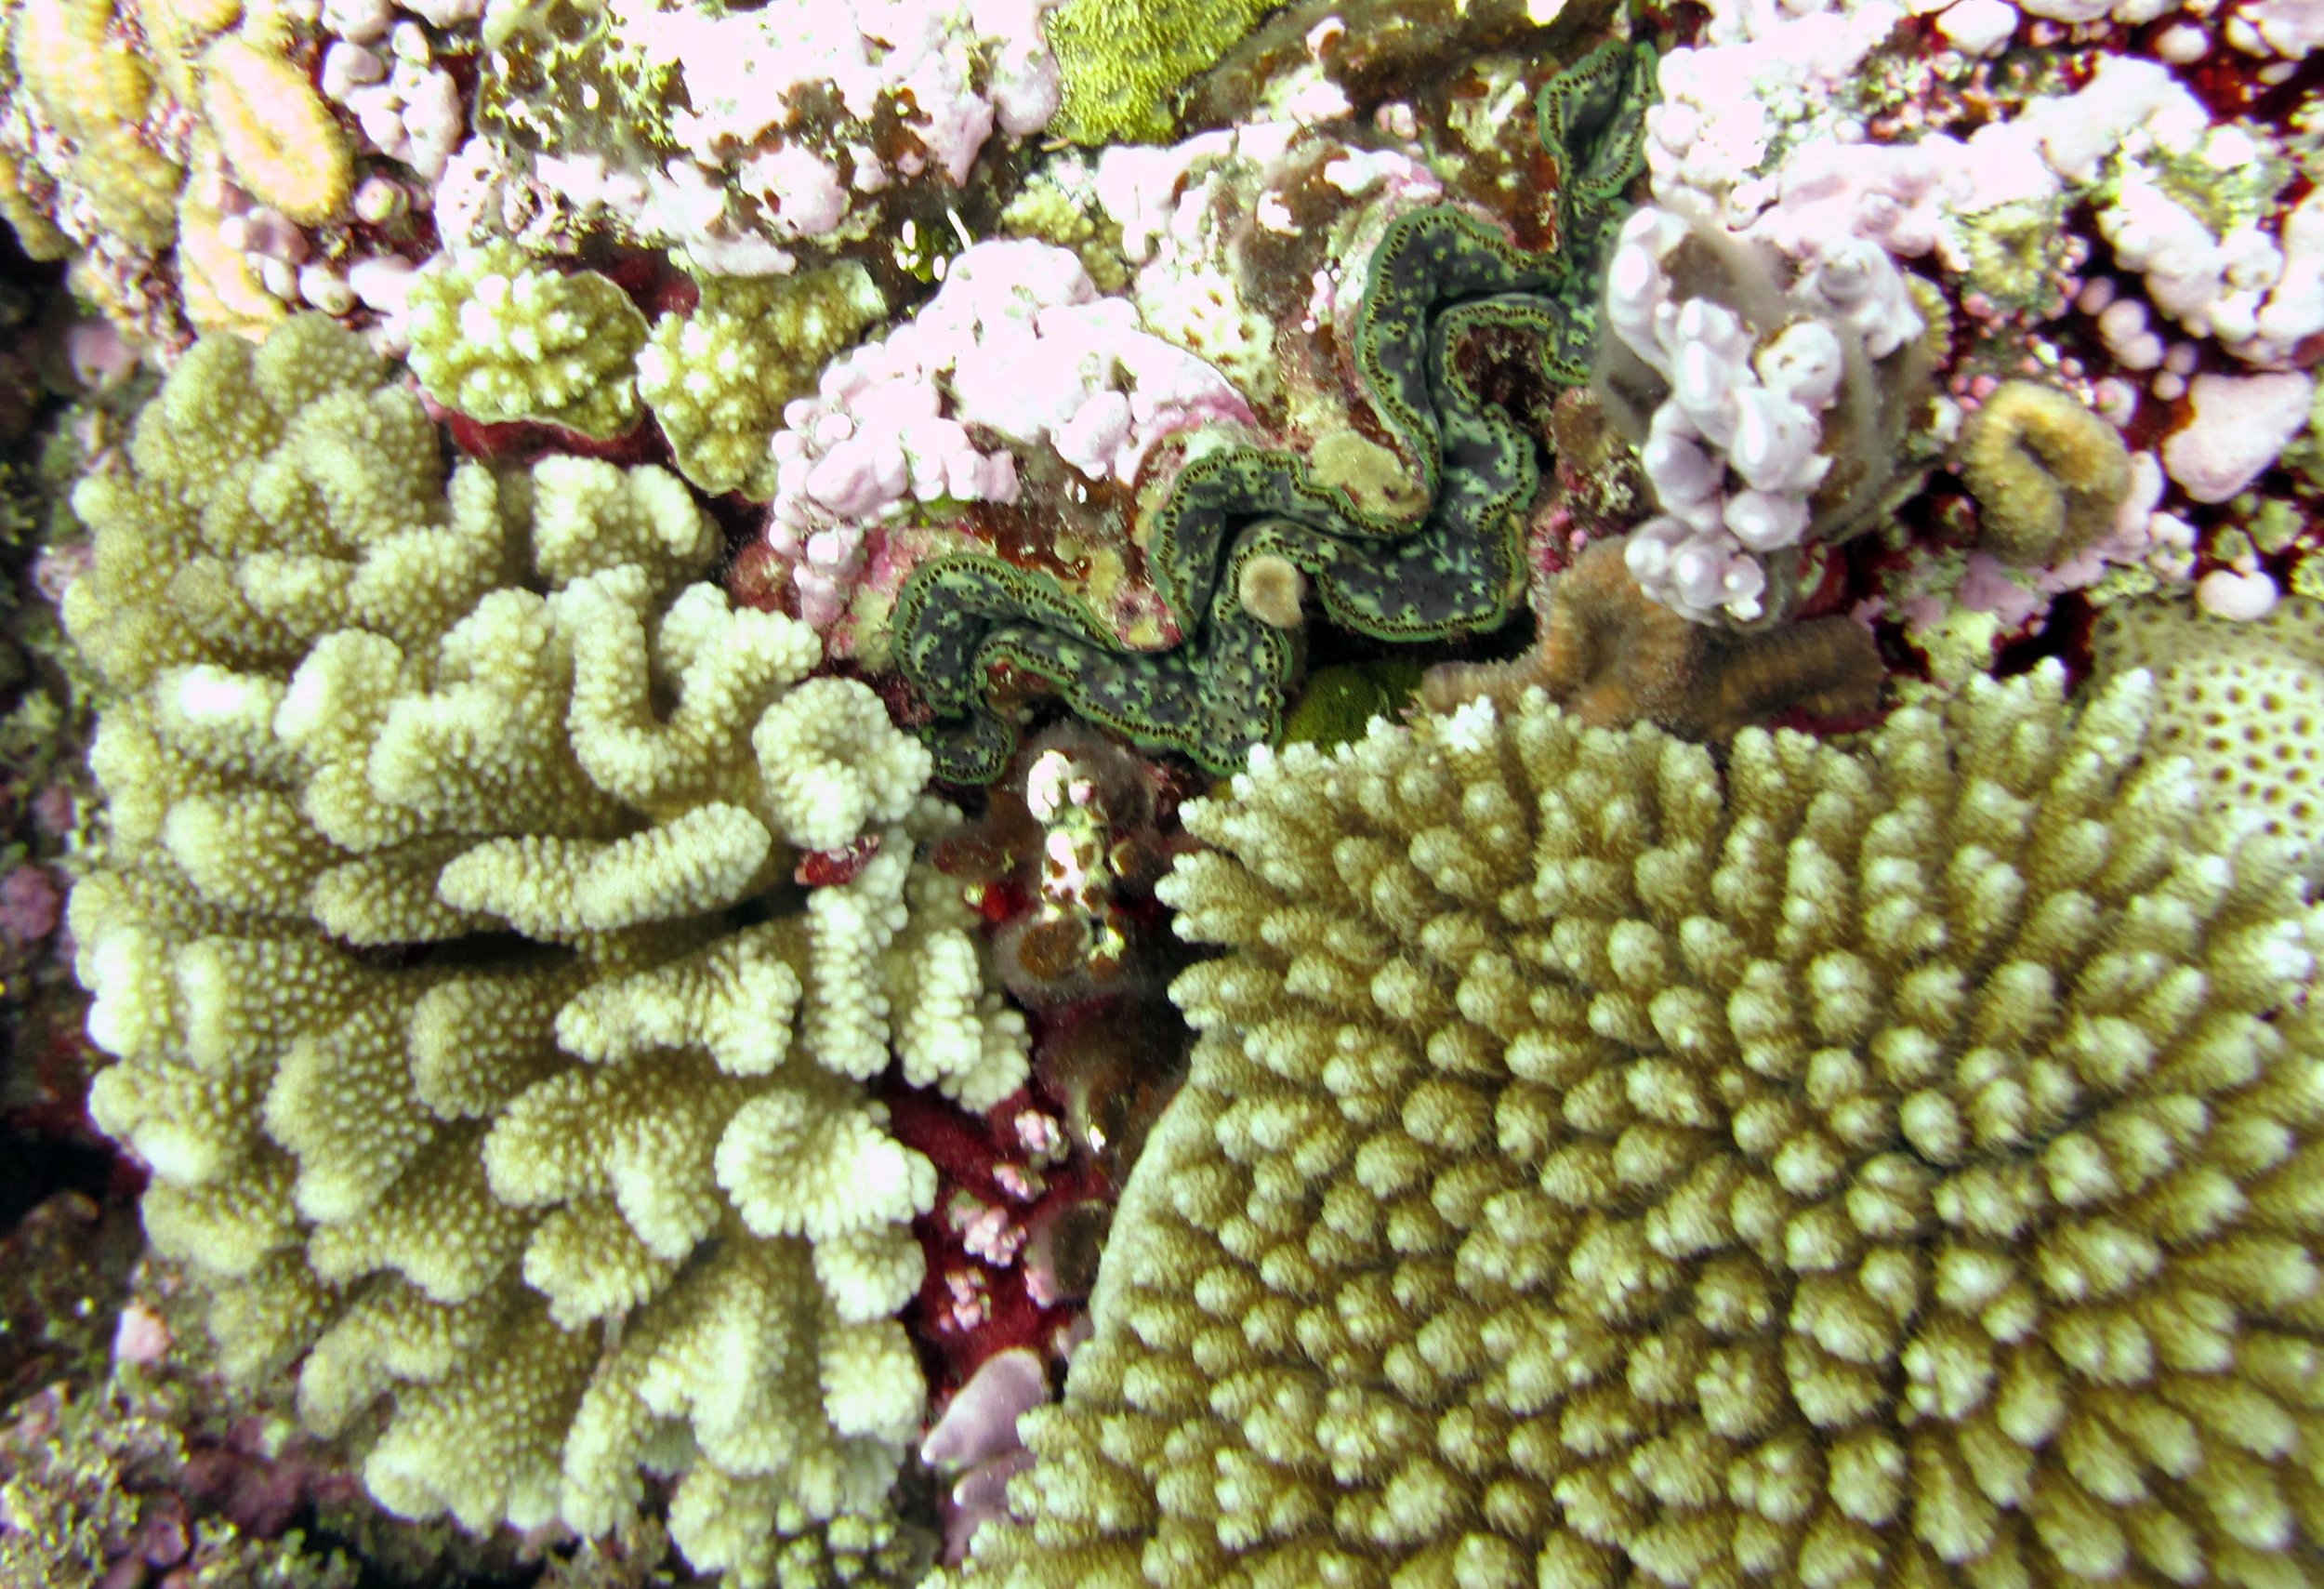 giant clam and corals.jpg